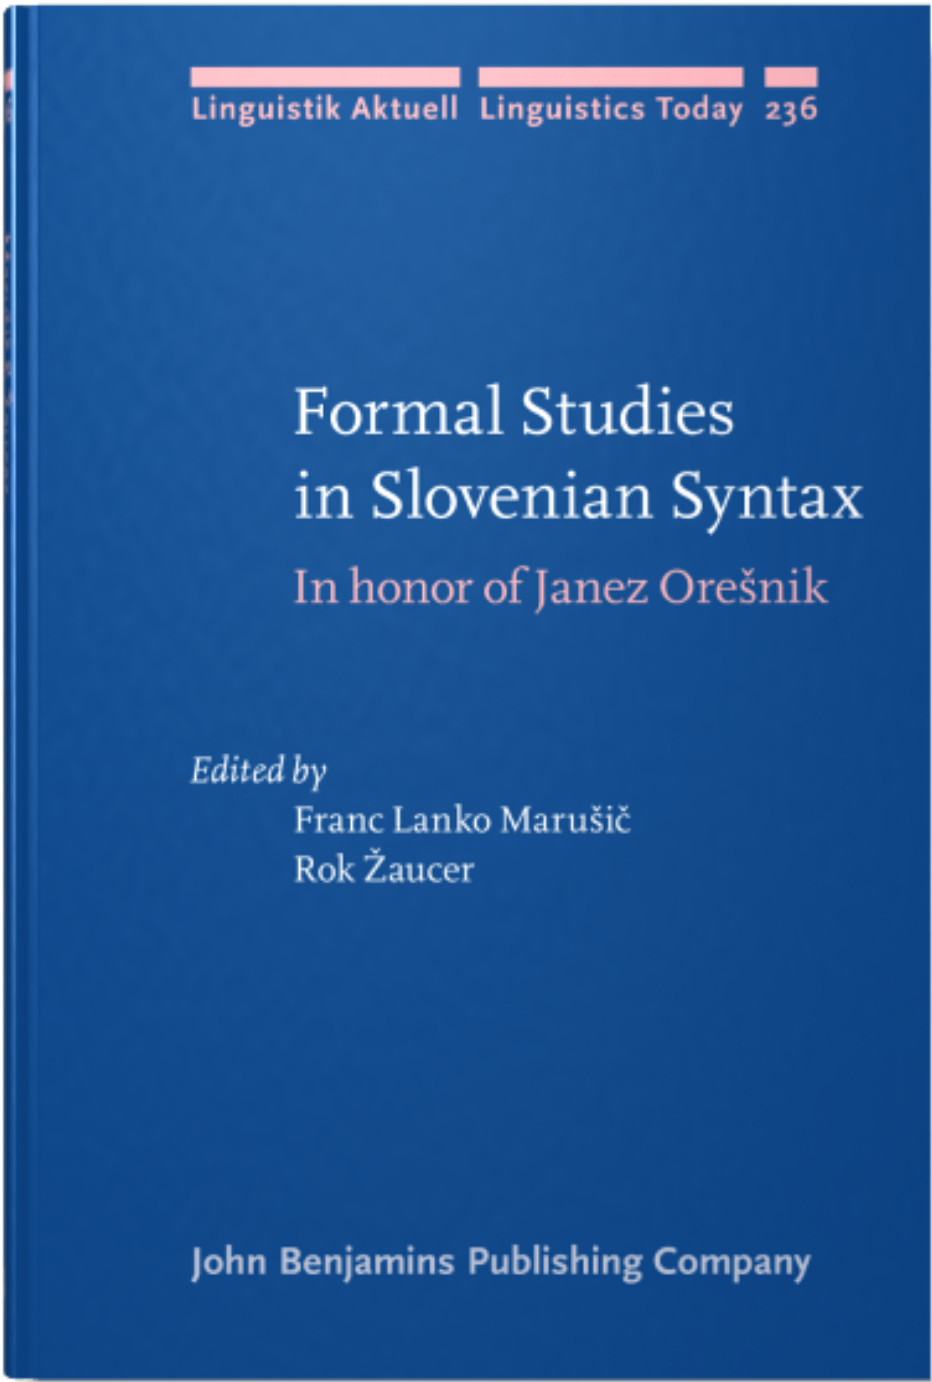 A relative syntax and semantics for Slovenian